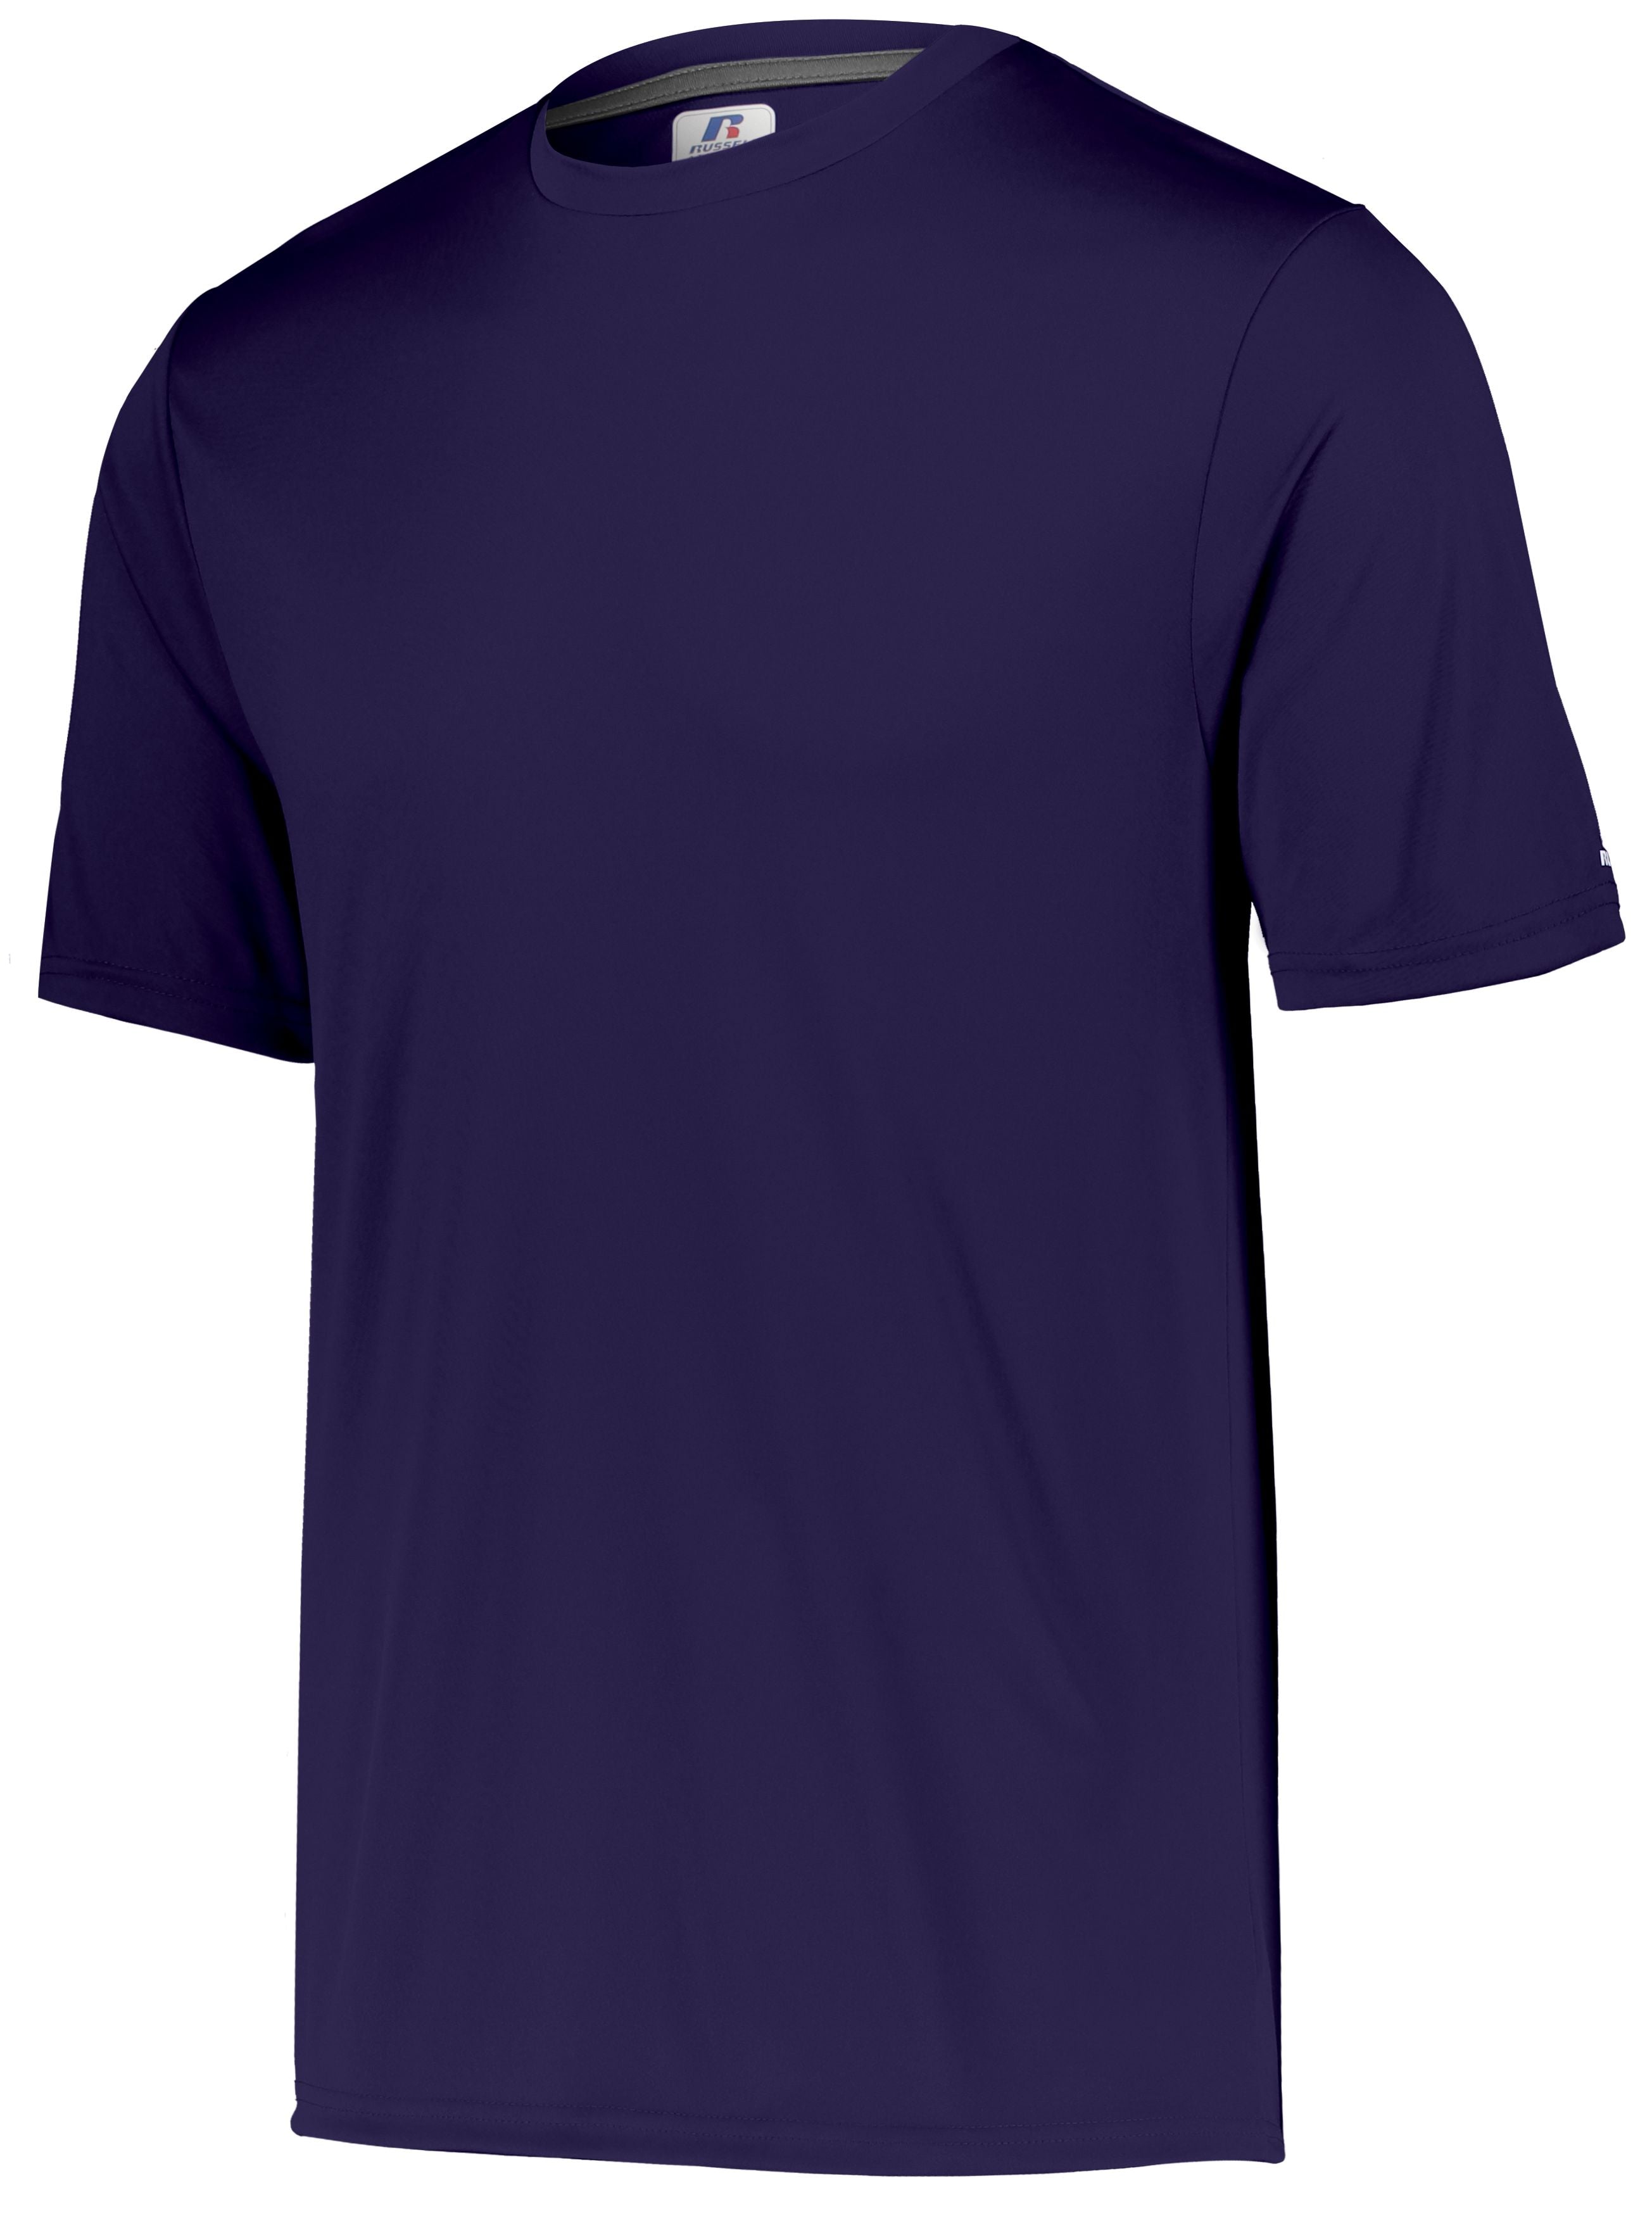 Russell Athletic Dri-Power Core Performance Tee in Purple  -Part of the Adult, Adult-Tee-Shirt, T-Shirts, Russell-Athletic-Products, Shirts product lines at KanaleyCreations.com